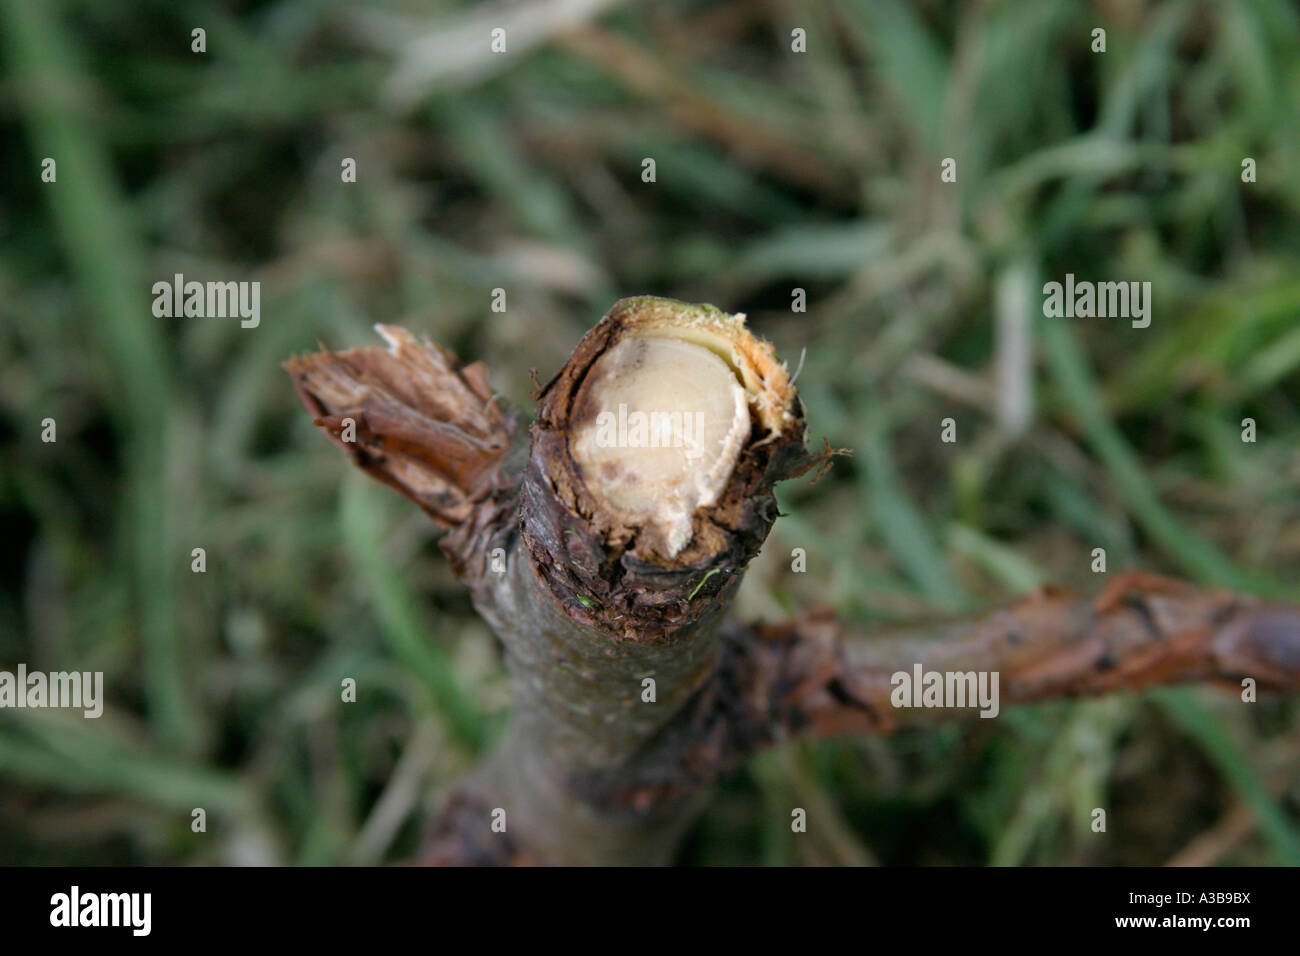 Apple canker Nectria spp section to show death of cambial layer Stock Photo